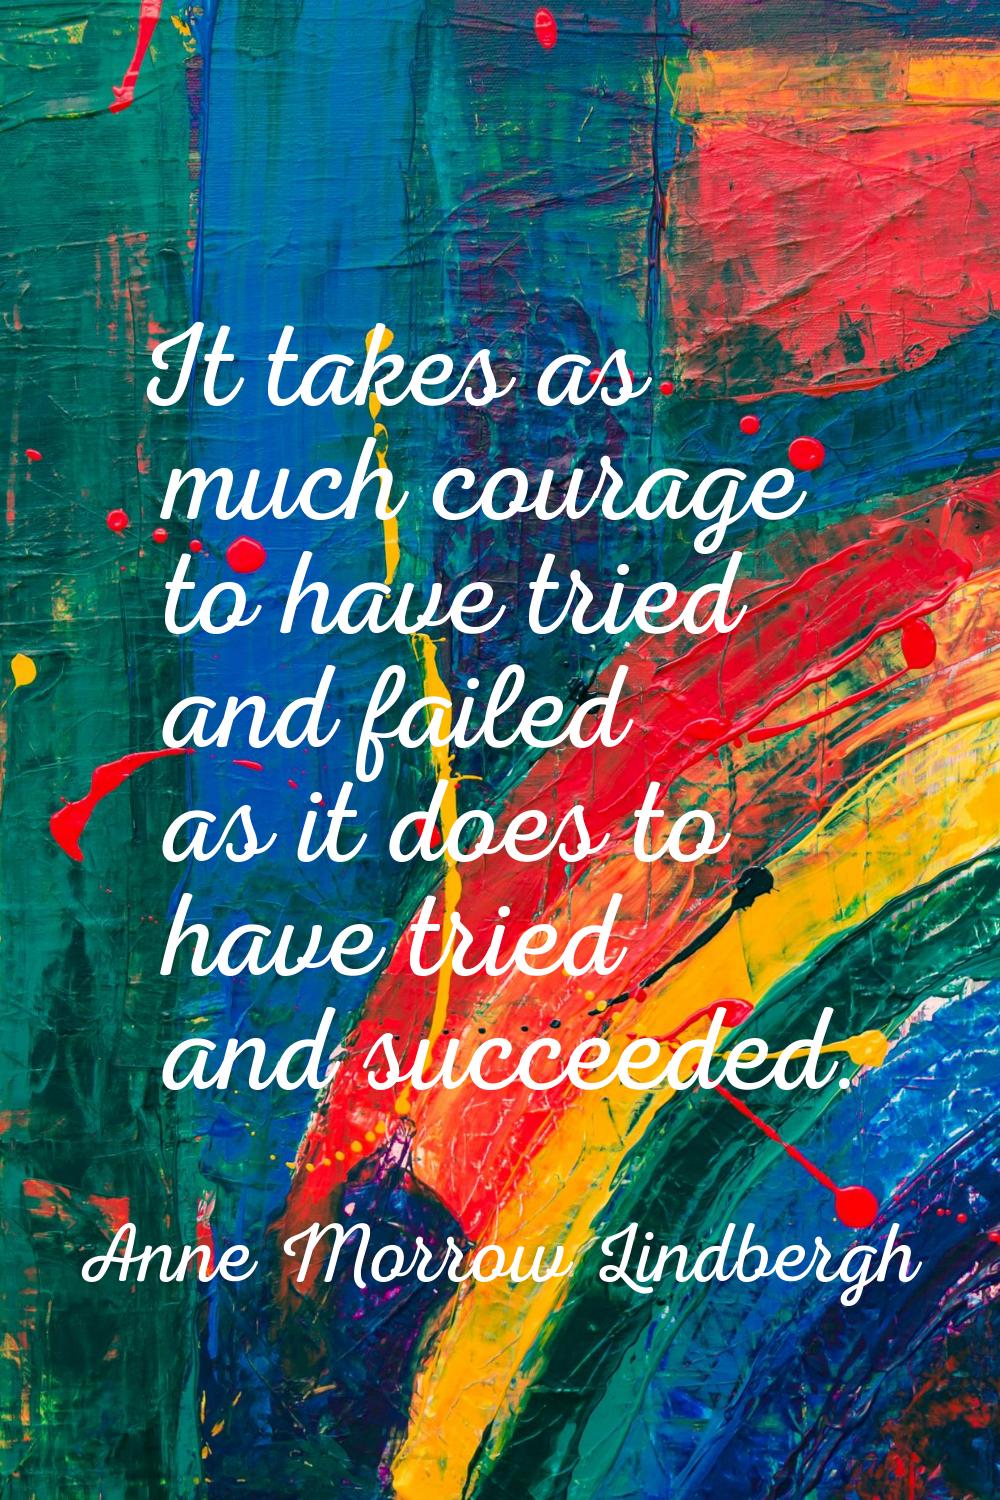 It takes as much courage to have tried and failed as it does to have tried and succeeded.